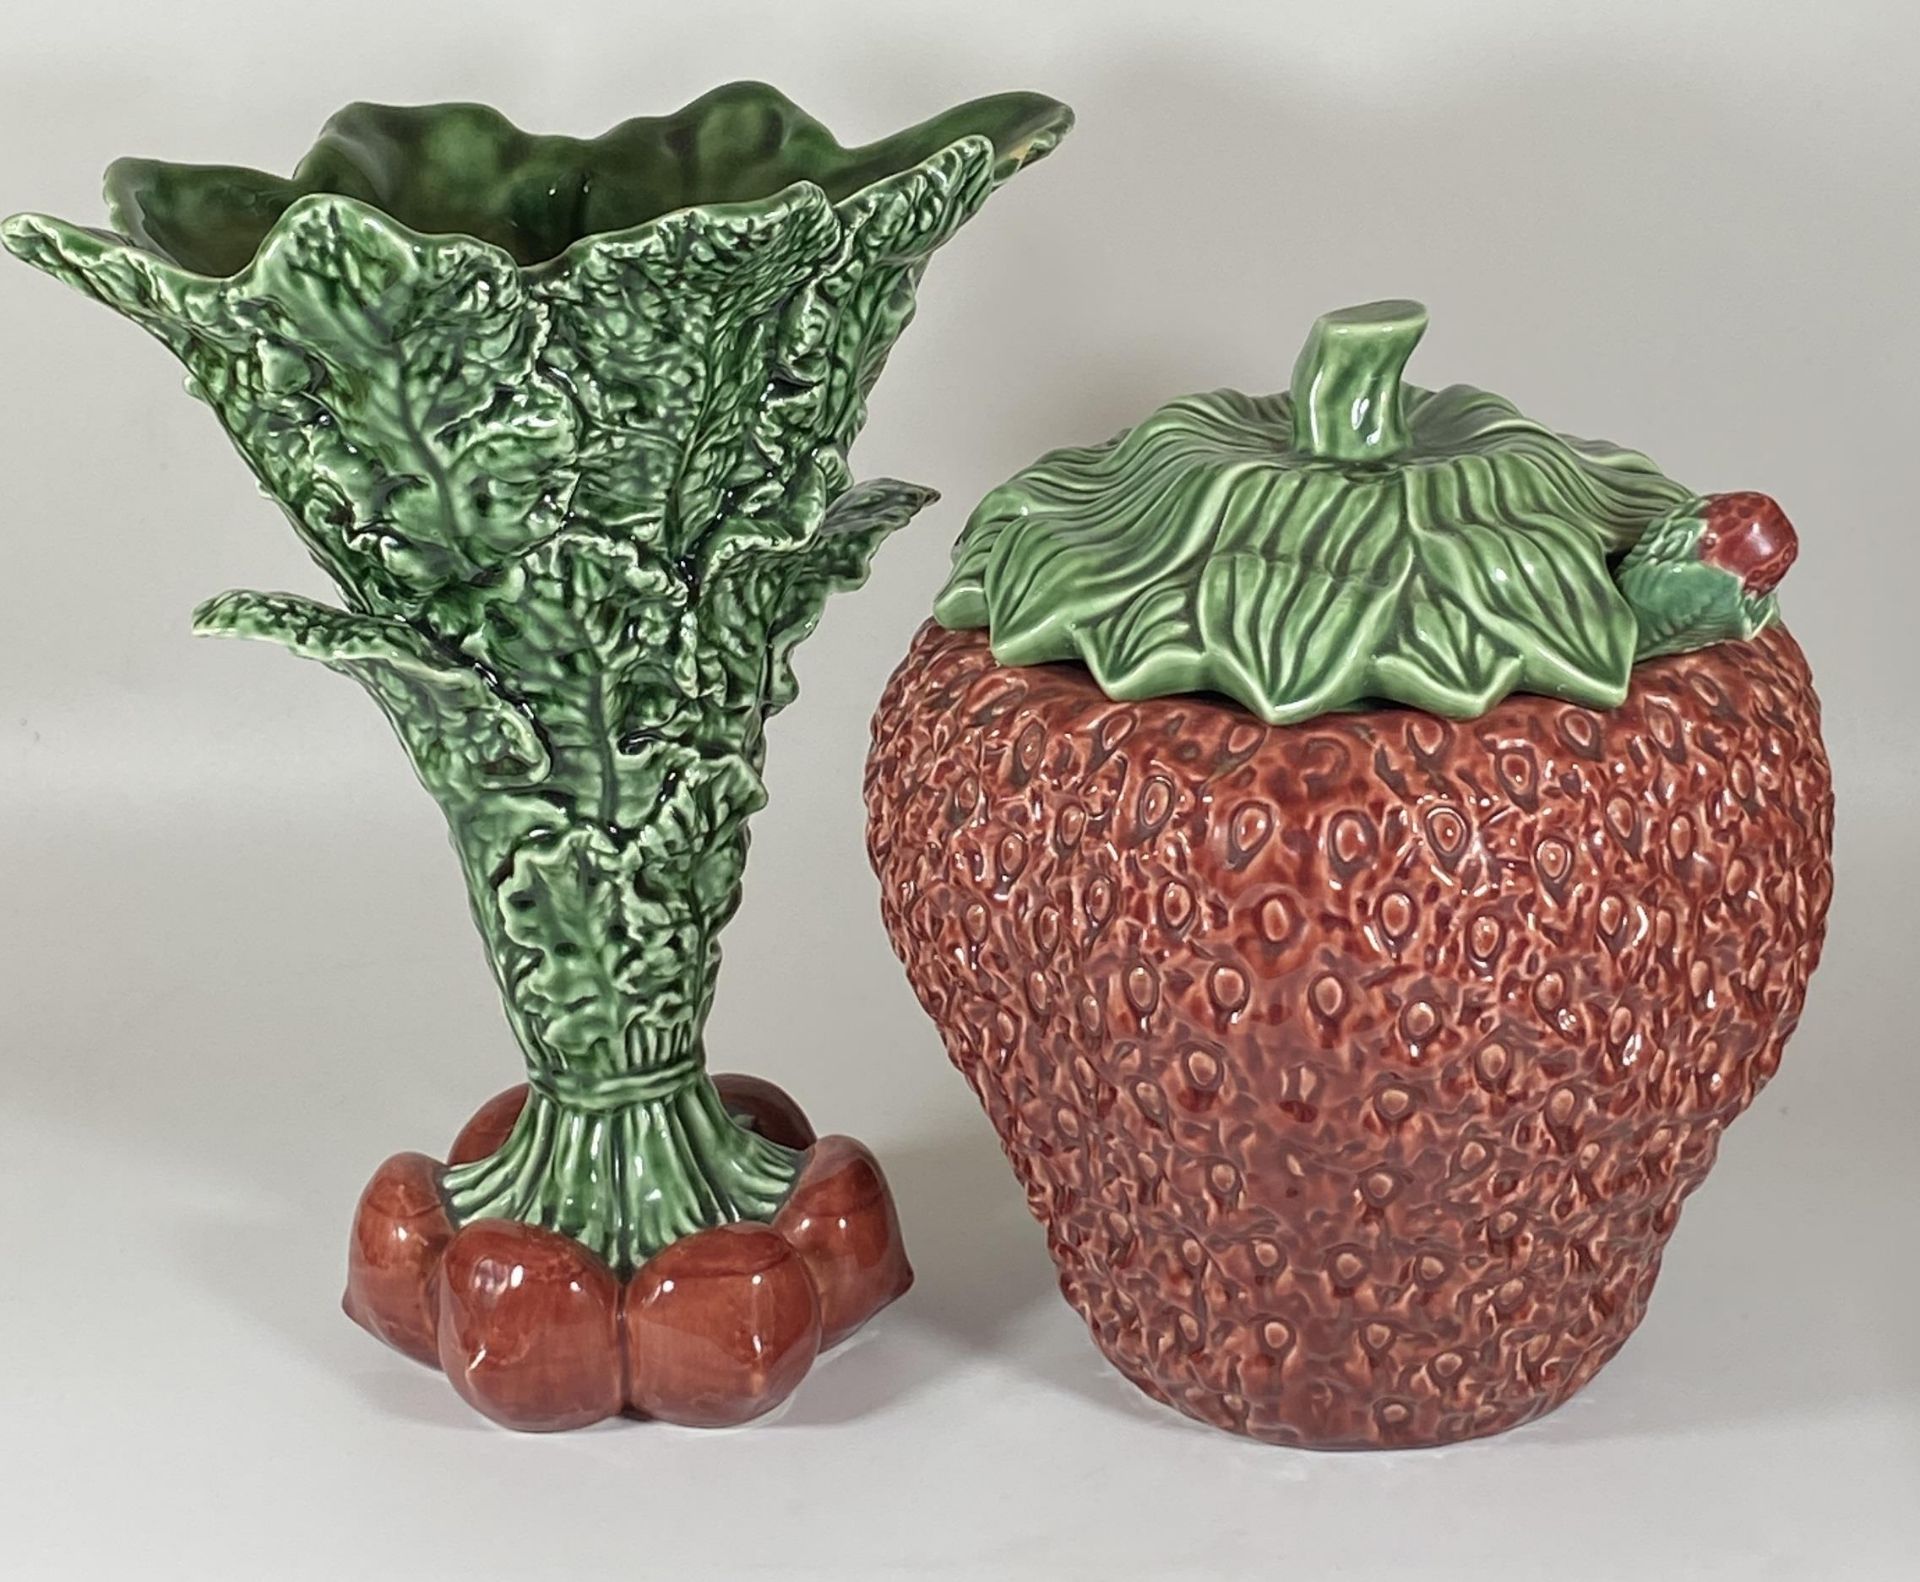 TWO LARGE MAJOLICA STYLE ITEMS - VASE AND STRAWBERRY POT WITH LADLE